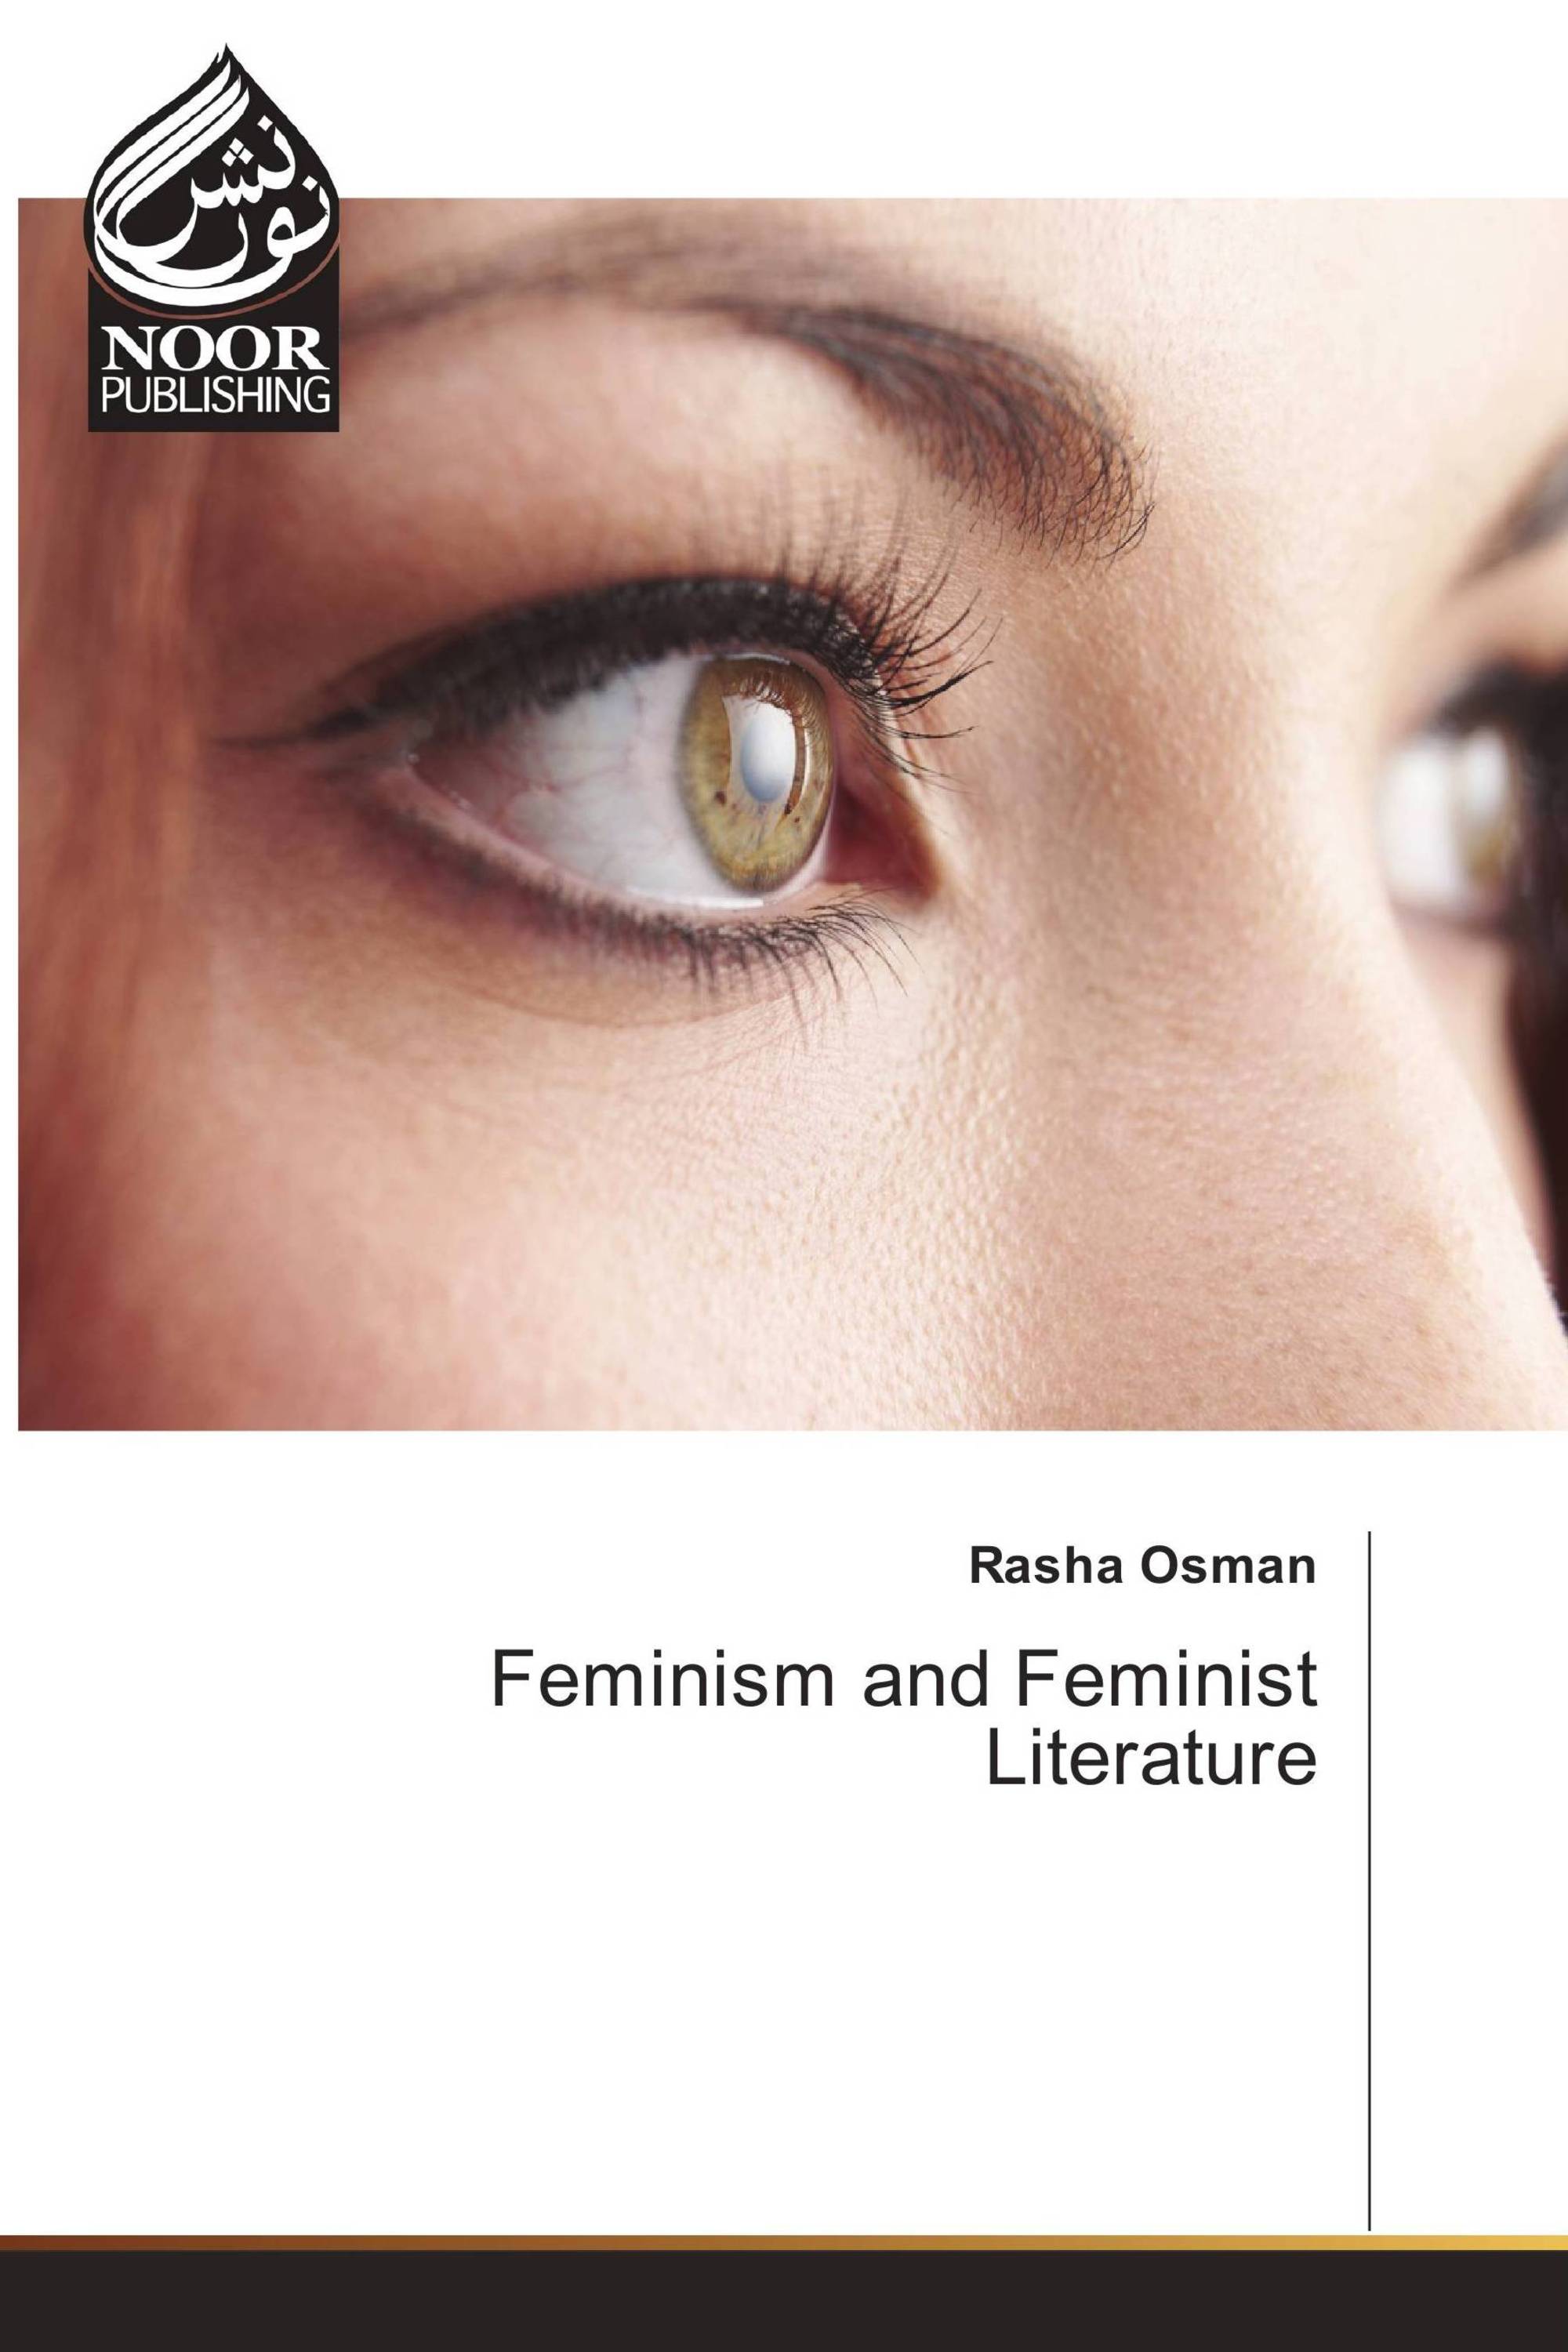 literature review about feminism